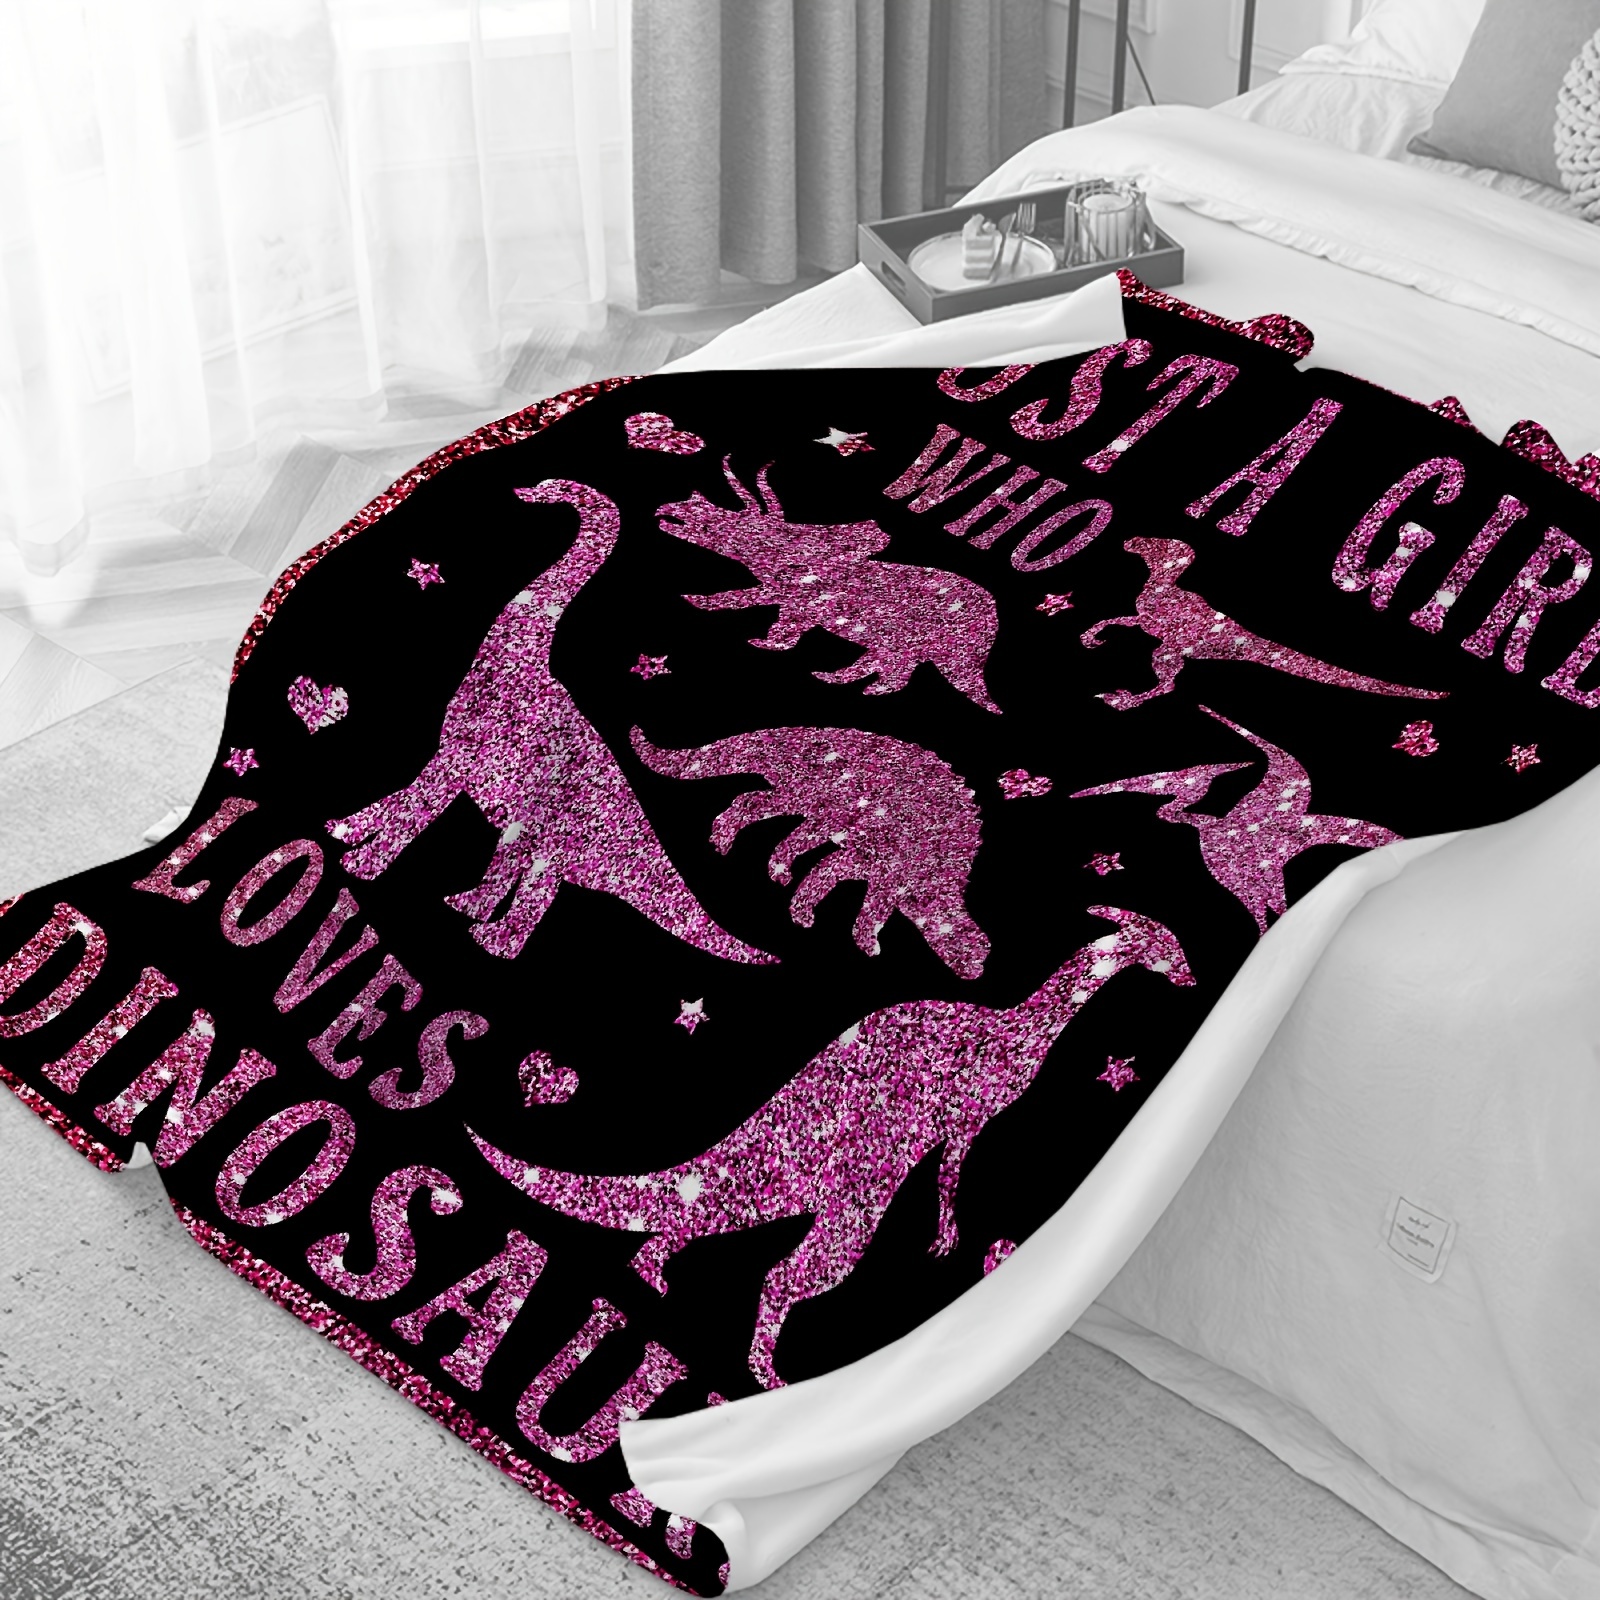 

Just A Girl Who Loves Dinosaurs 1 Fleece Throw Blanket Soft Lightweight Warm Fuzzy Blankets For Couch Sofa Bed Traveling 39 X 29 Inch For Boys Girls